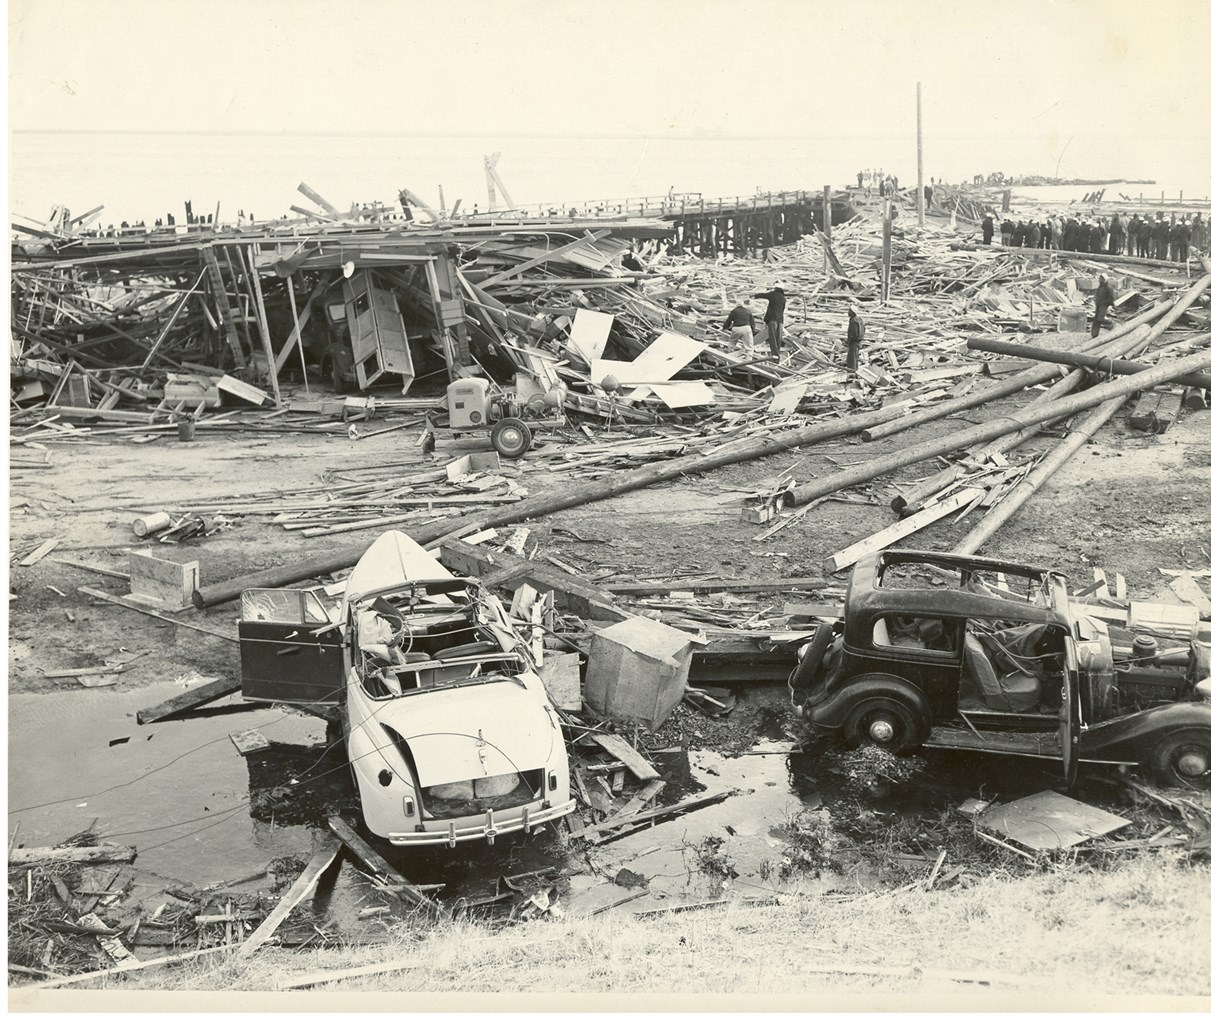 Historic Black and white photo of the disaster aftermath. Two cars and a lot of debris from buildings.